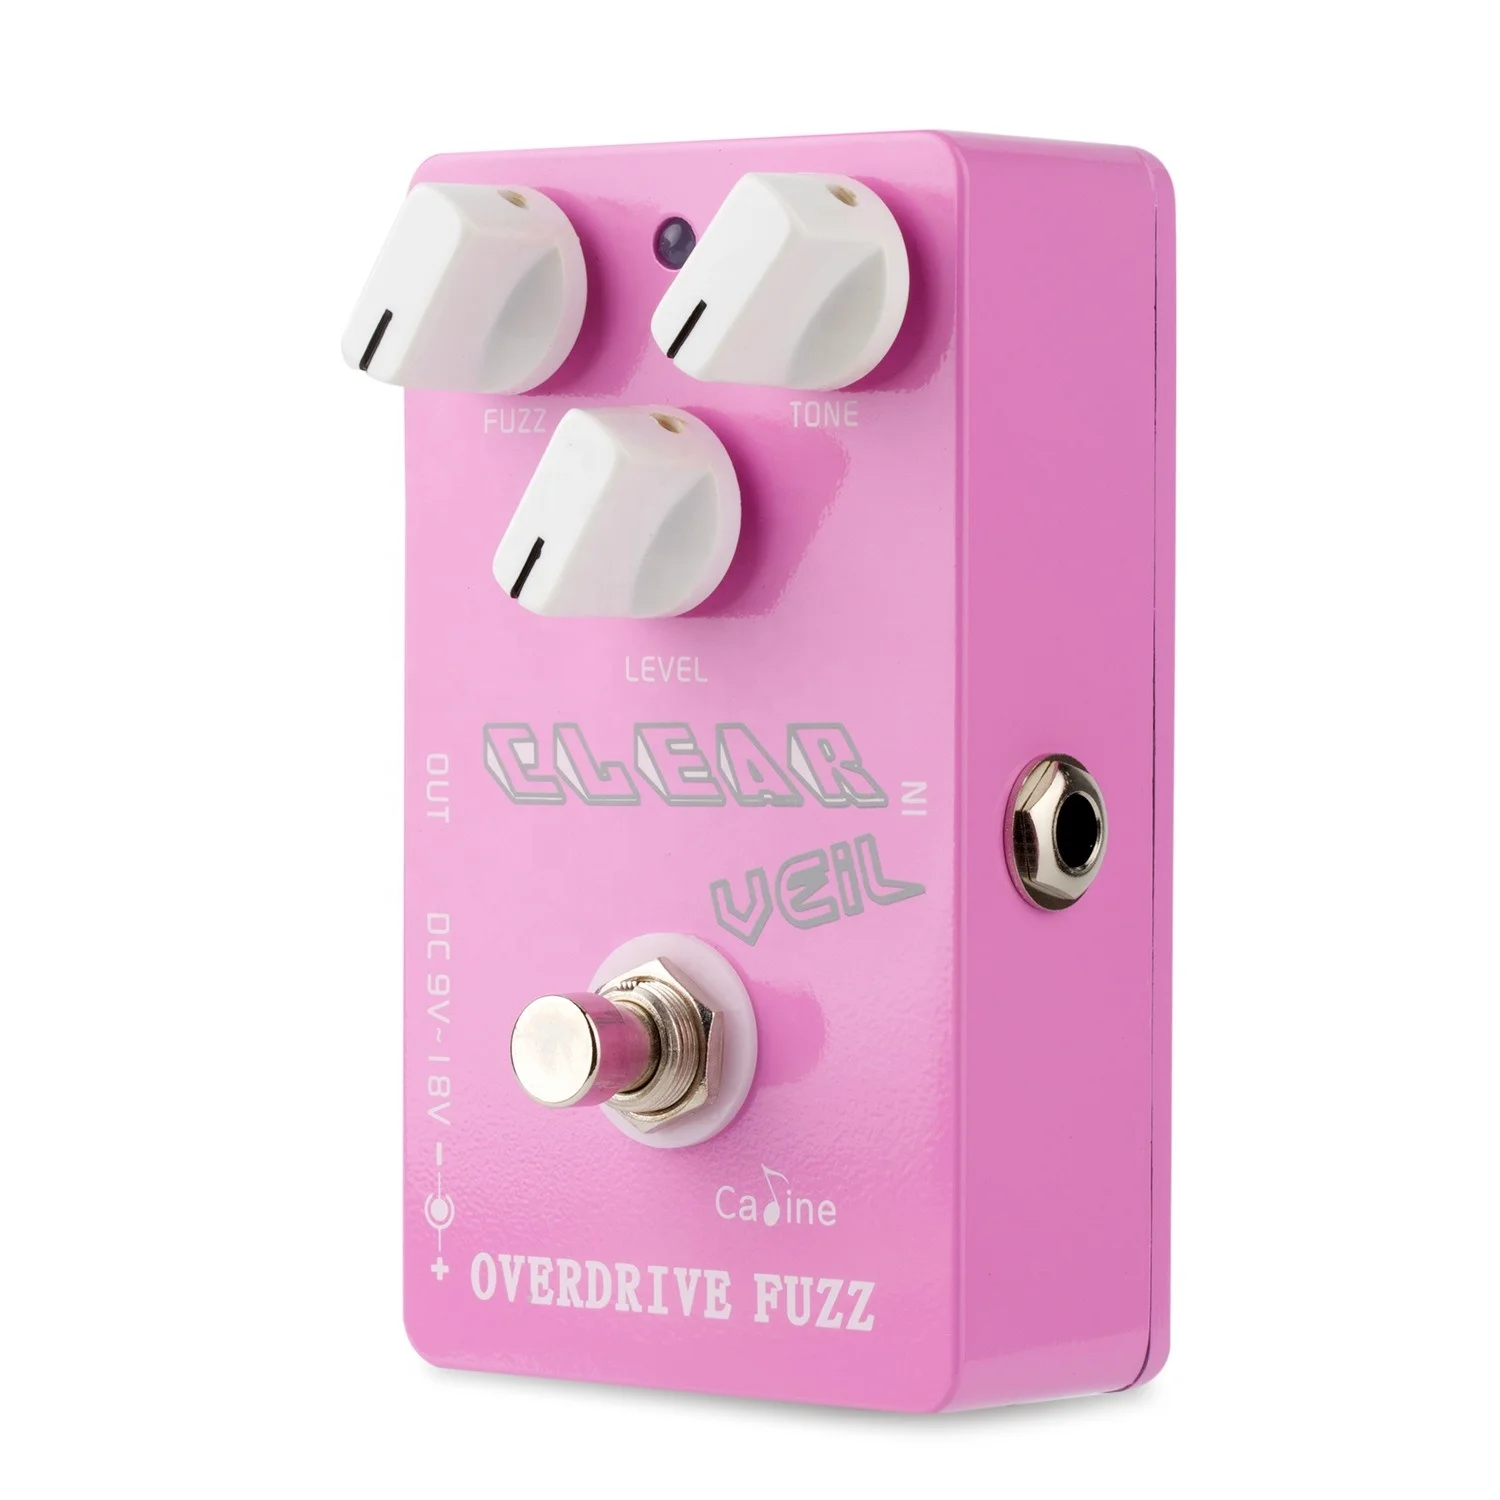 Caline Cp-32 Pink Effects Pedal "clear Veil" Overdrive Fuzz Electric Effect Pedal - Buy Electric Guitar Effect Pedal With True Effect Of Overdrive Fuzz,Effect Pedal Of 9v Battery Or